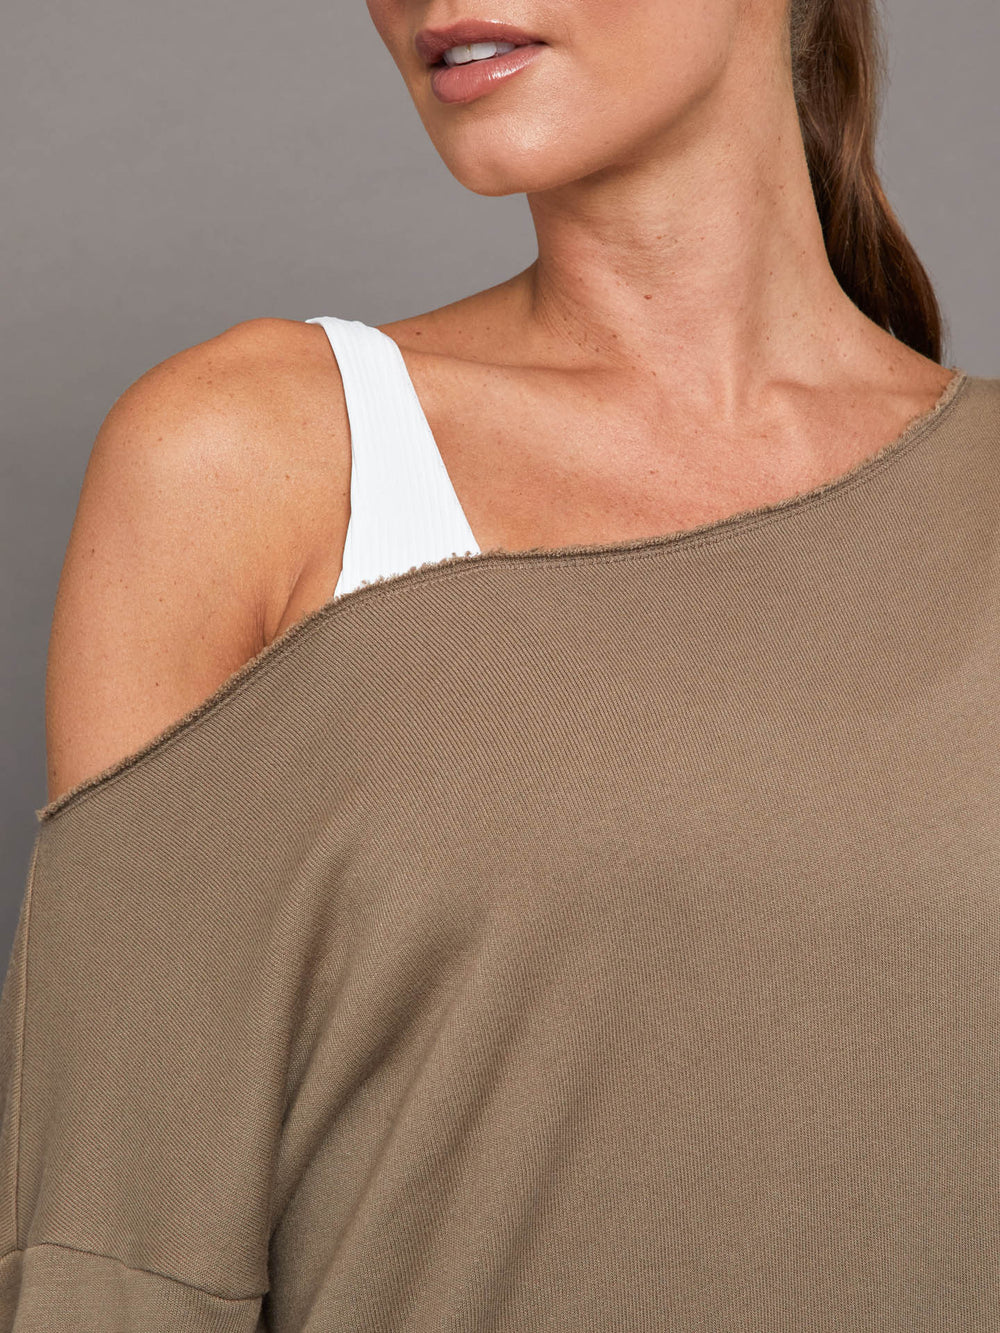 Off Shoulder Sweatshirt in French Terry - Caribou